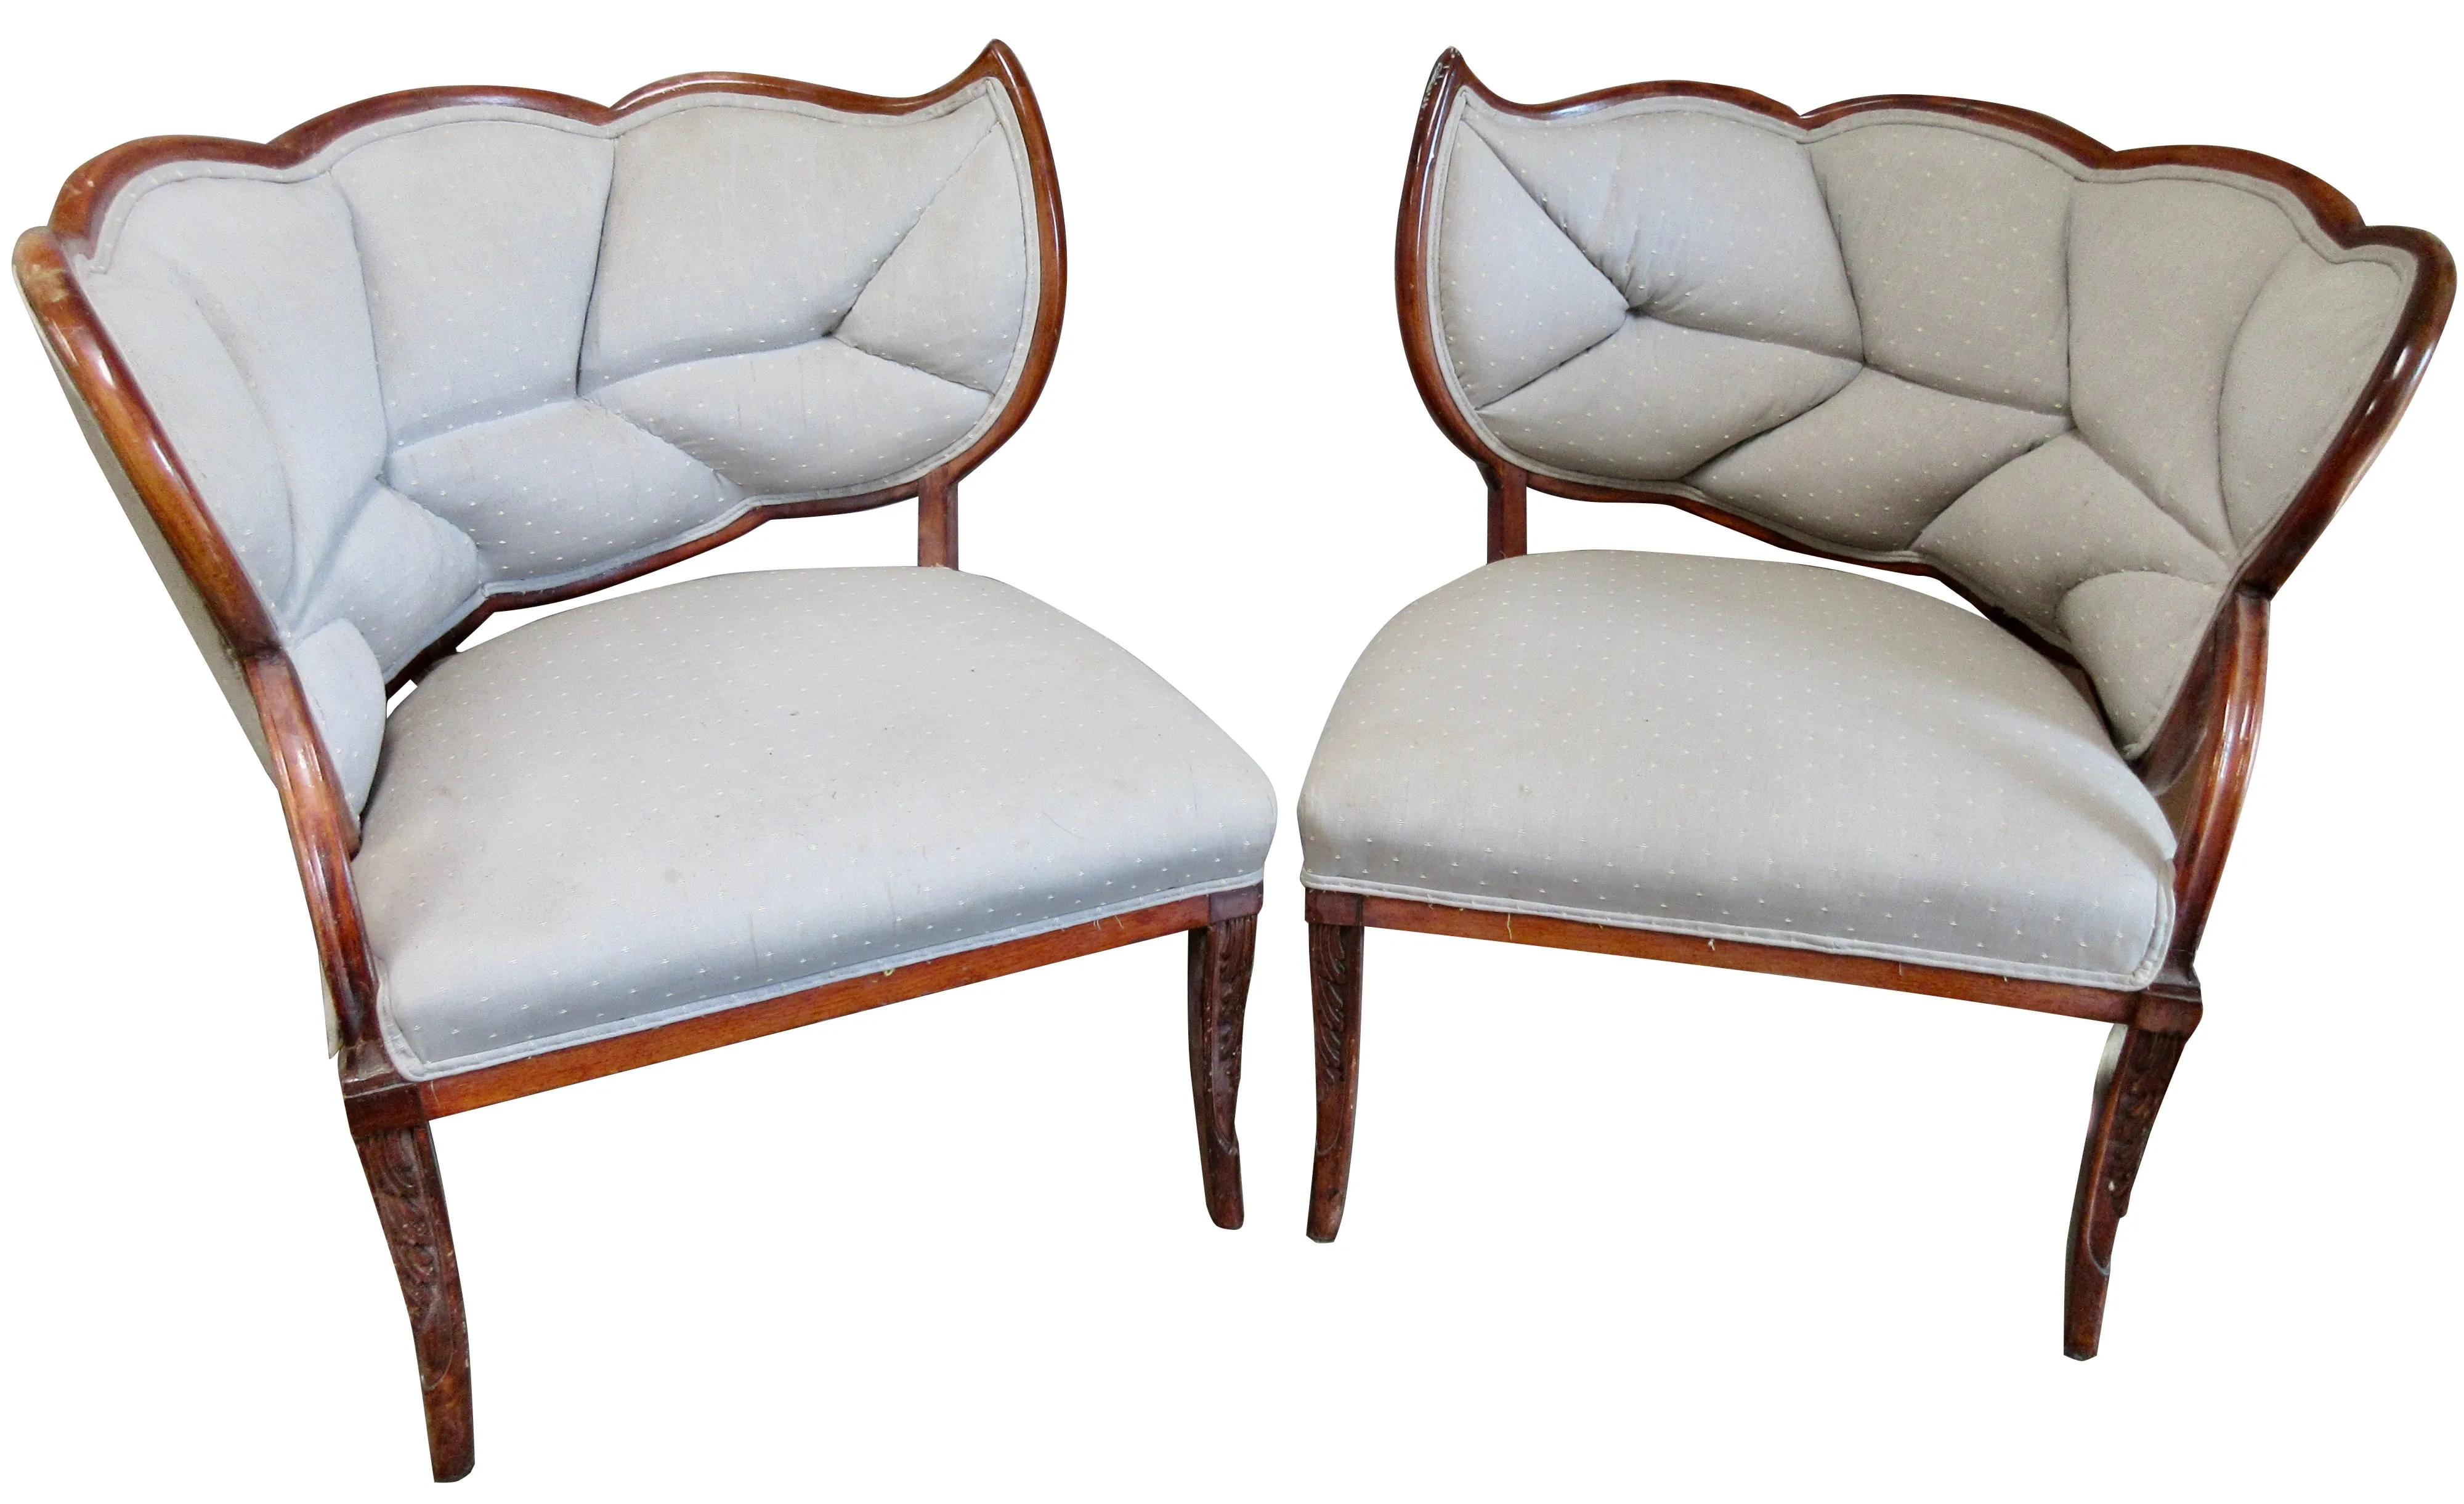 1940s Hollywood Regency Chairs - Set of 2 - The Emporium Ltd. - Gray